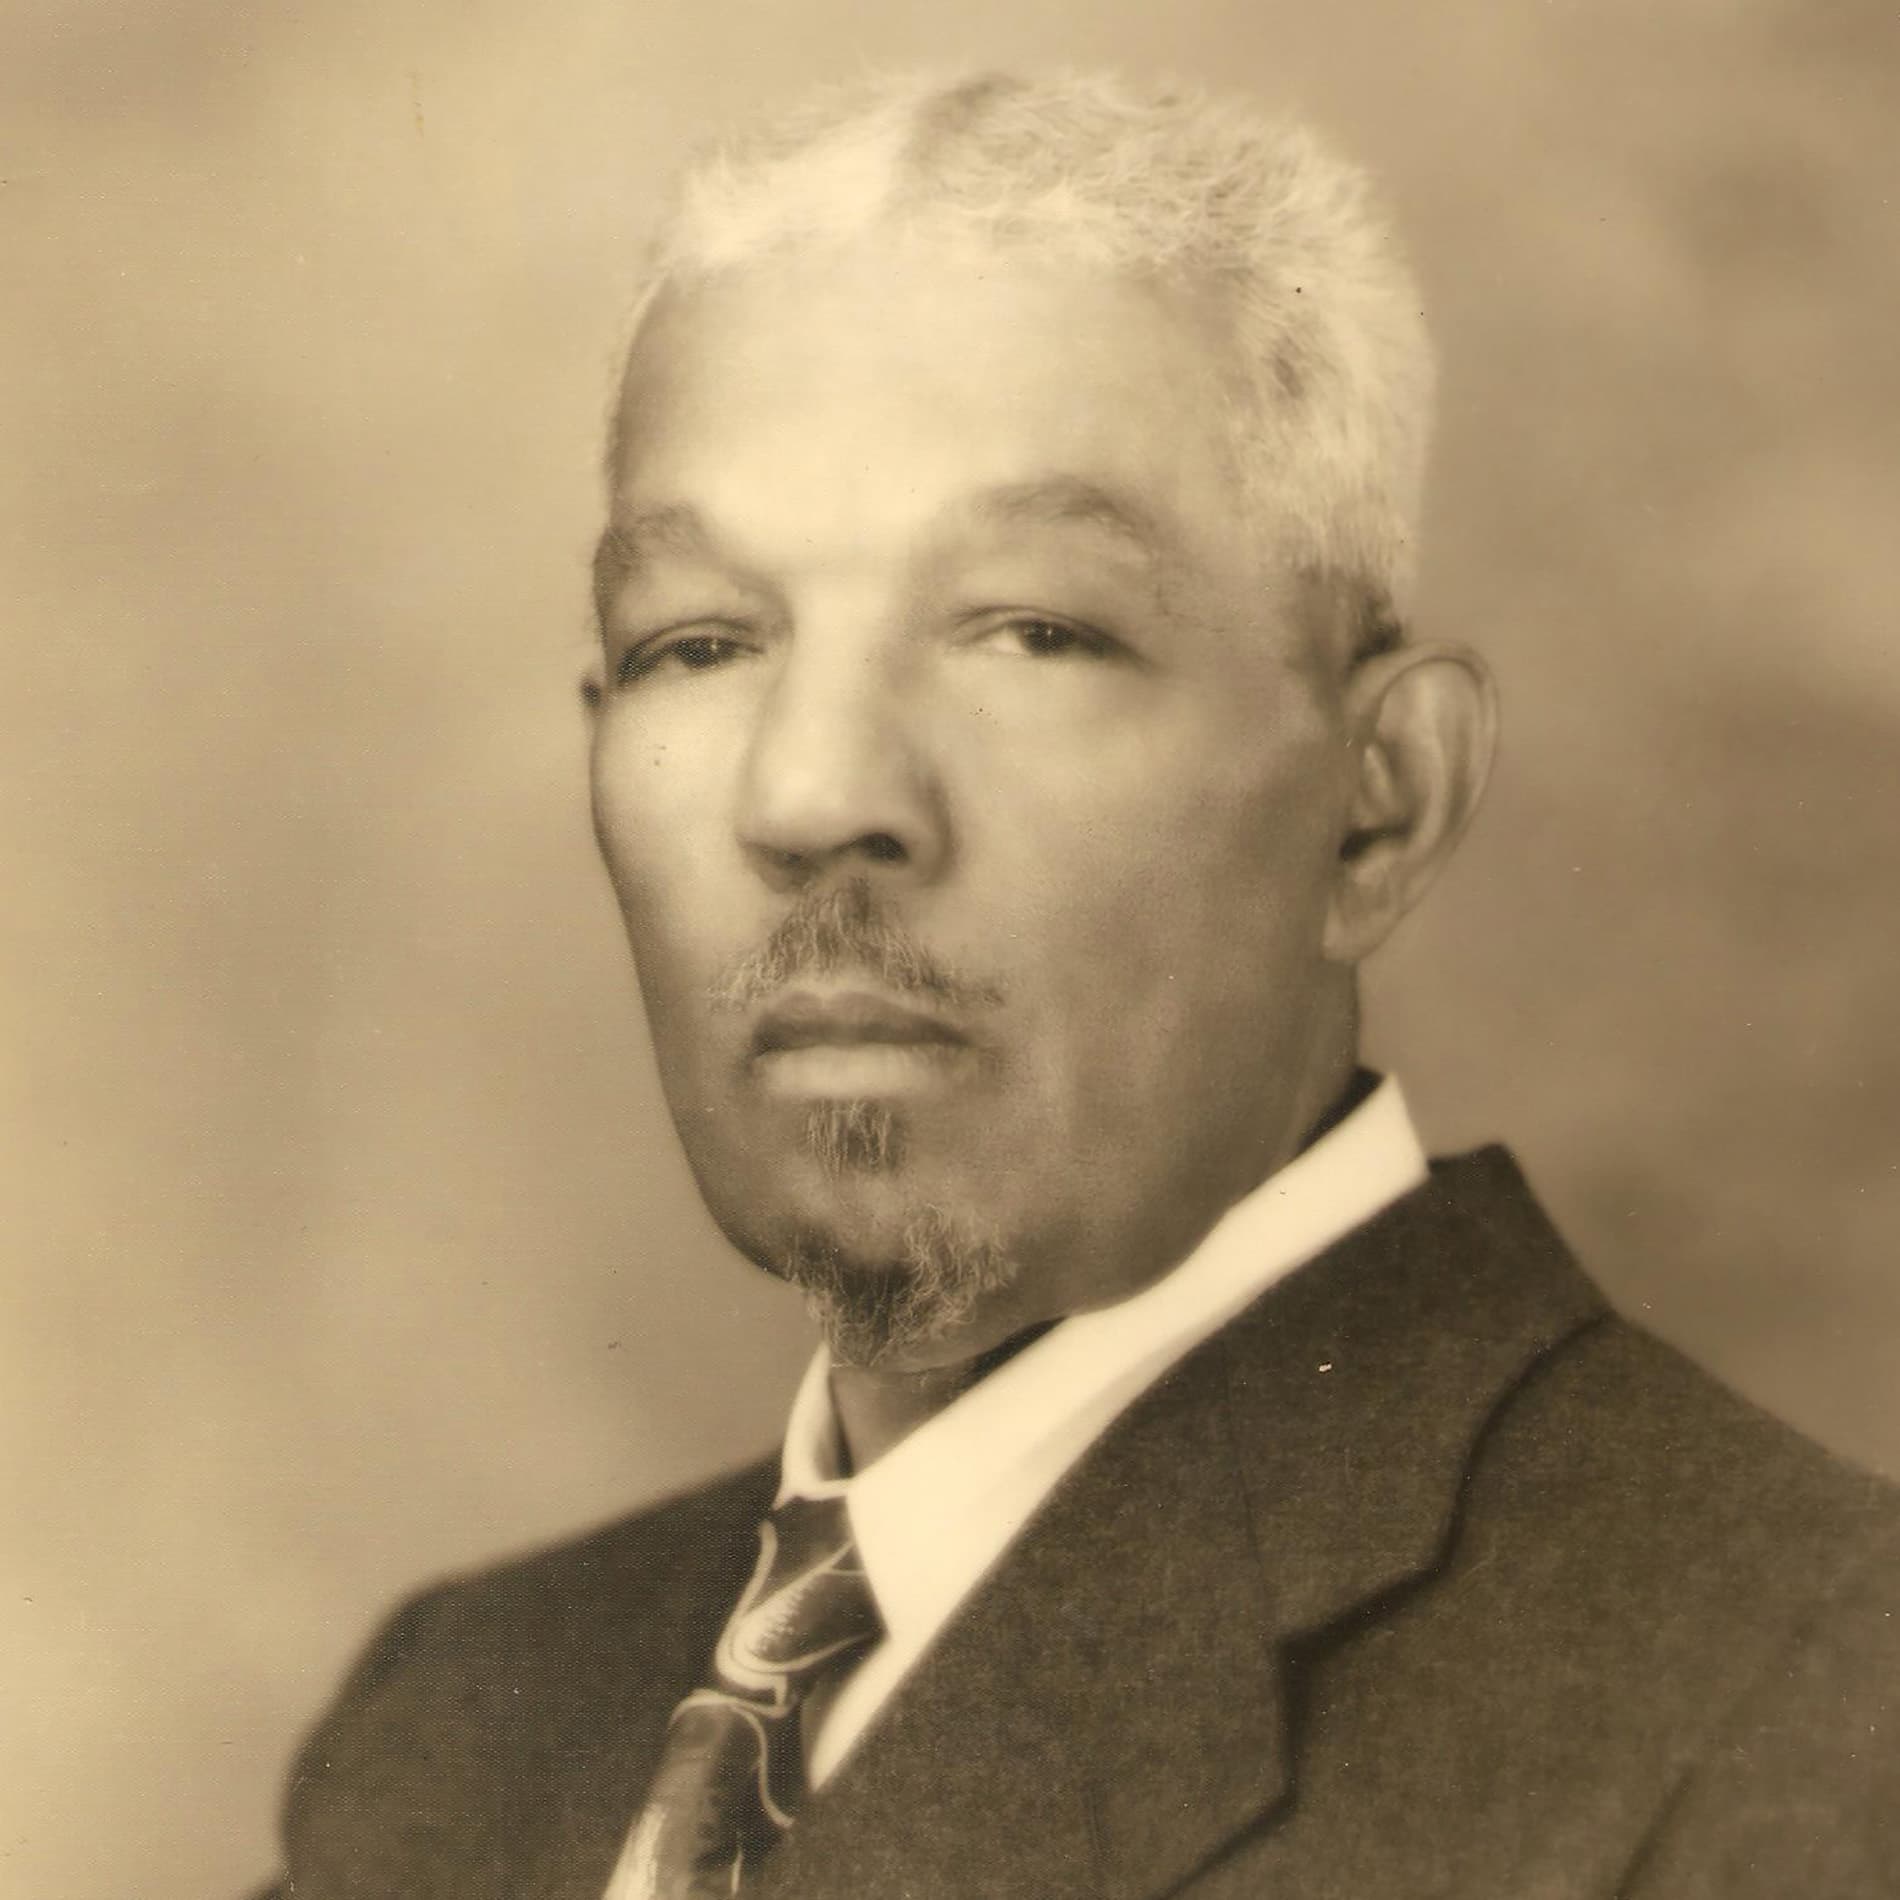 Dr. Cornelius Garland, c. 1948, founder of Plymouth Hospital, “the first and only Black hospital in Boston,” which operated in the South End from 1908-1928. (Courtesy Lisa Gordon) 